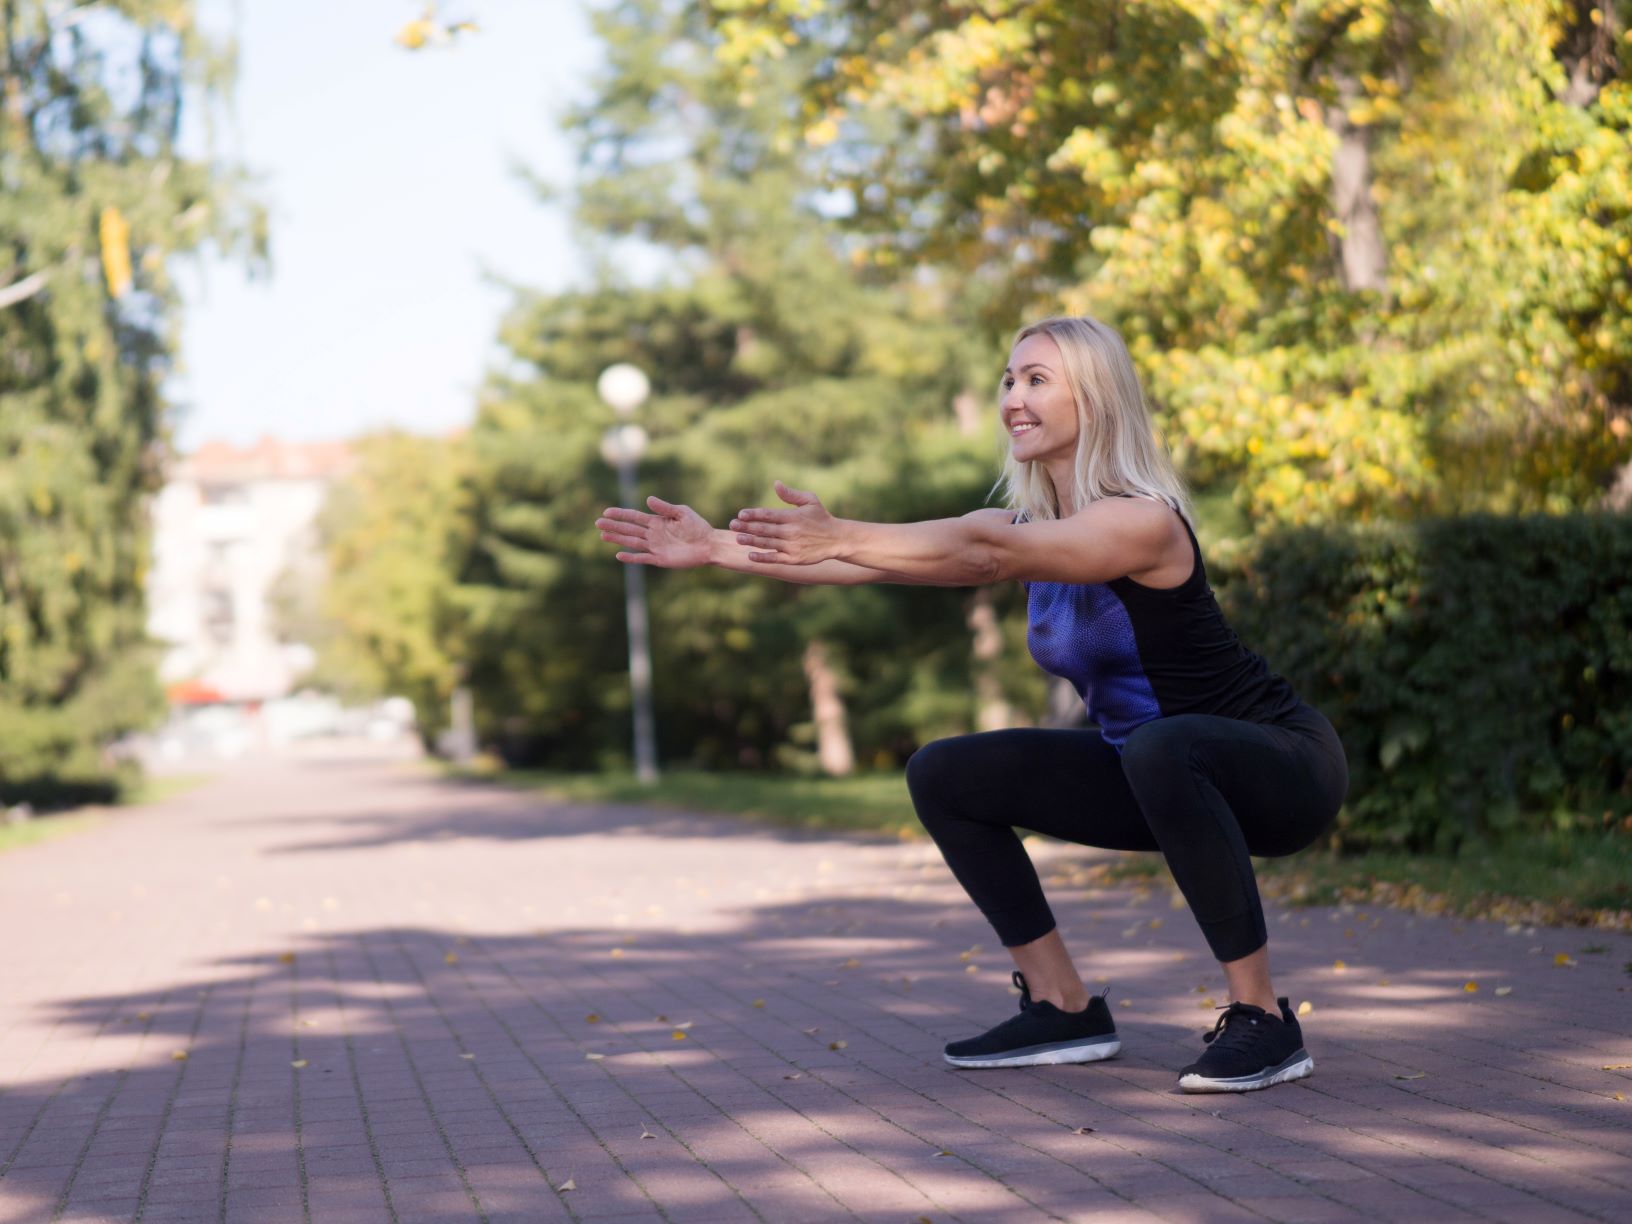 Middle-aged woman outside in deep squat, workouts to get your booty swimsuit ready